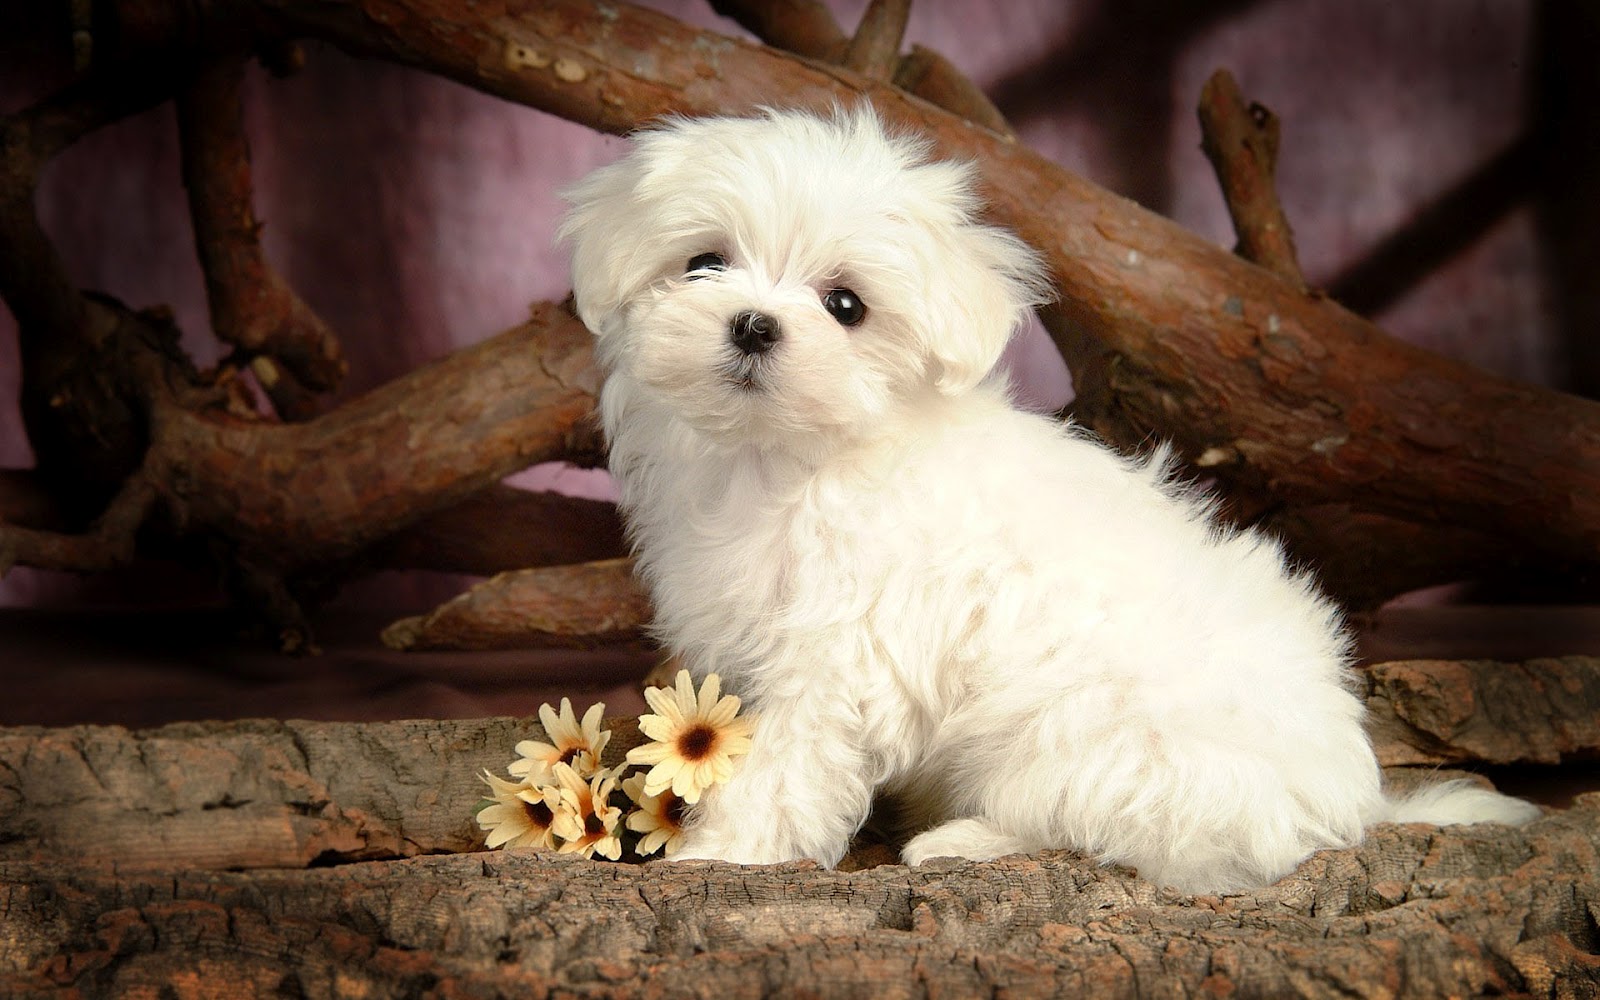 Cute Puppy Dog Wallpaper Pictures In High Definition Or